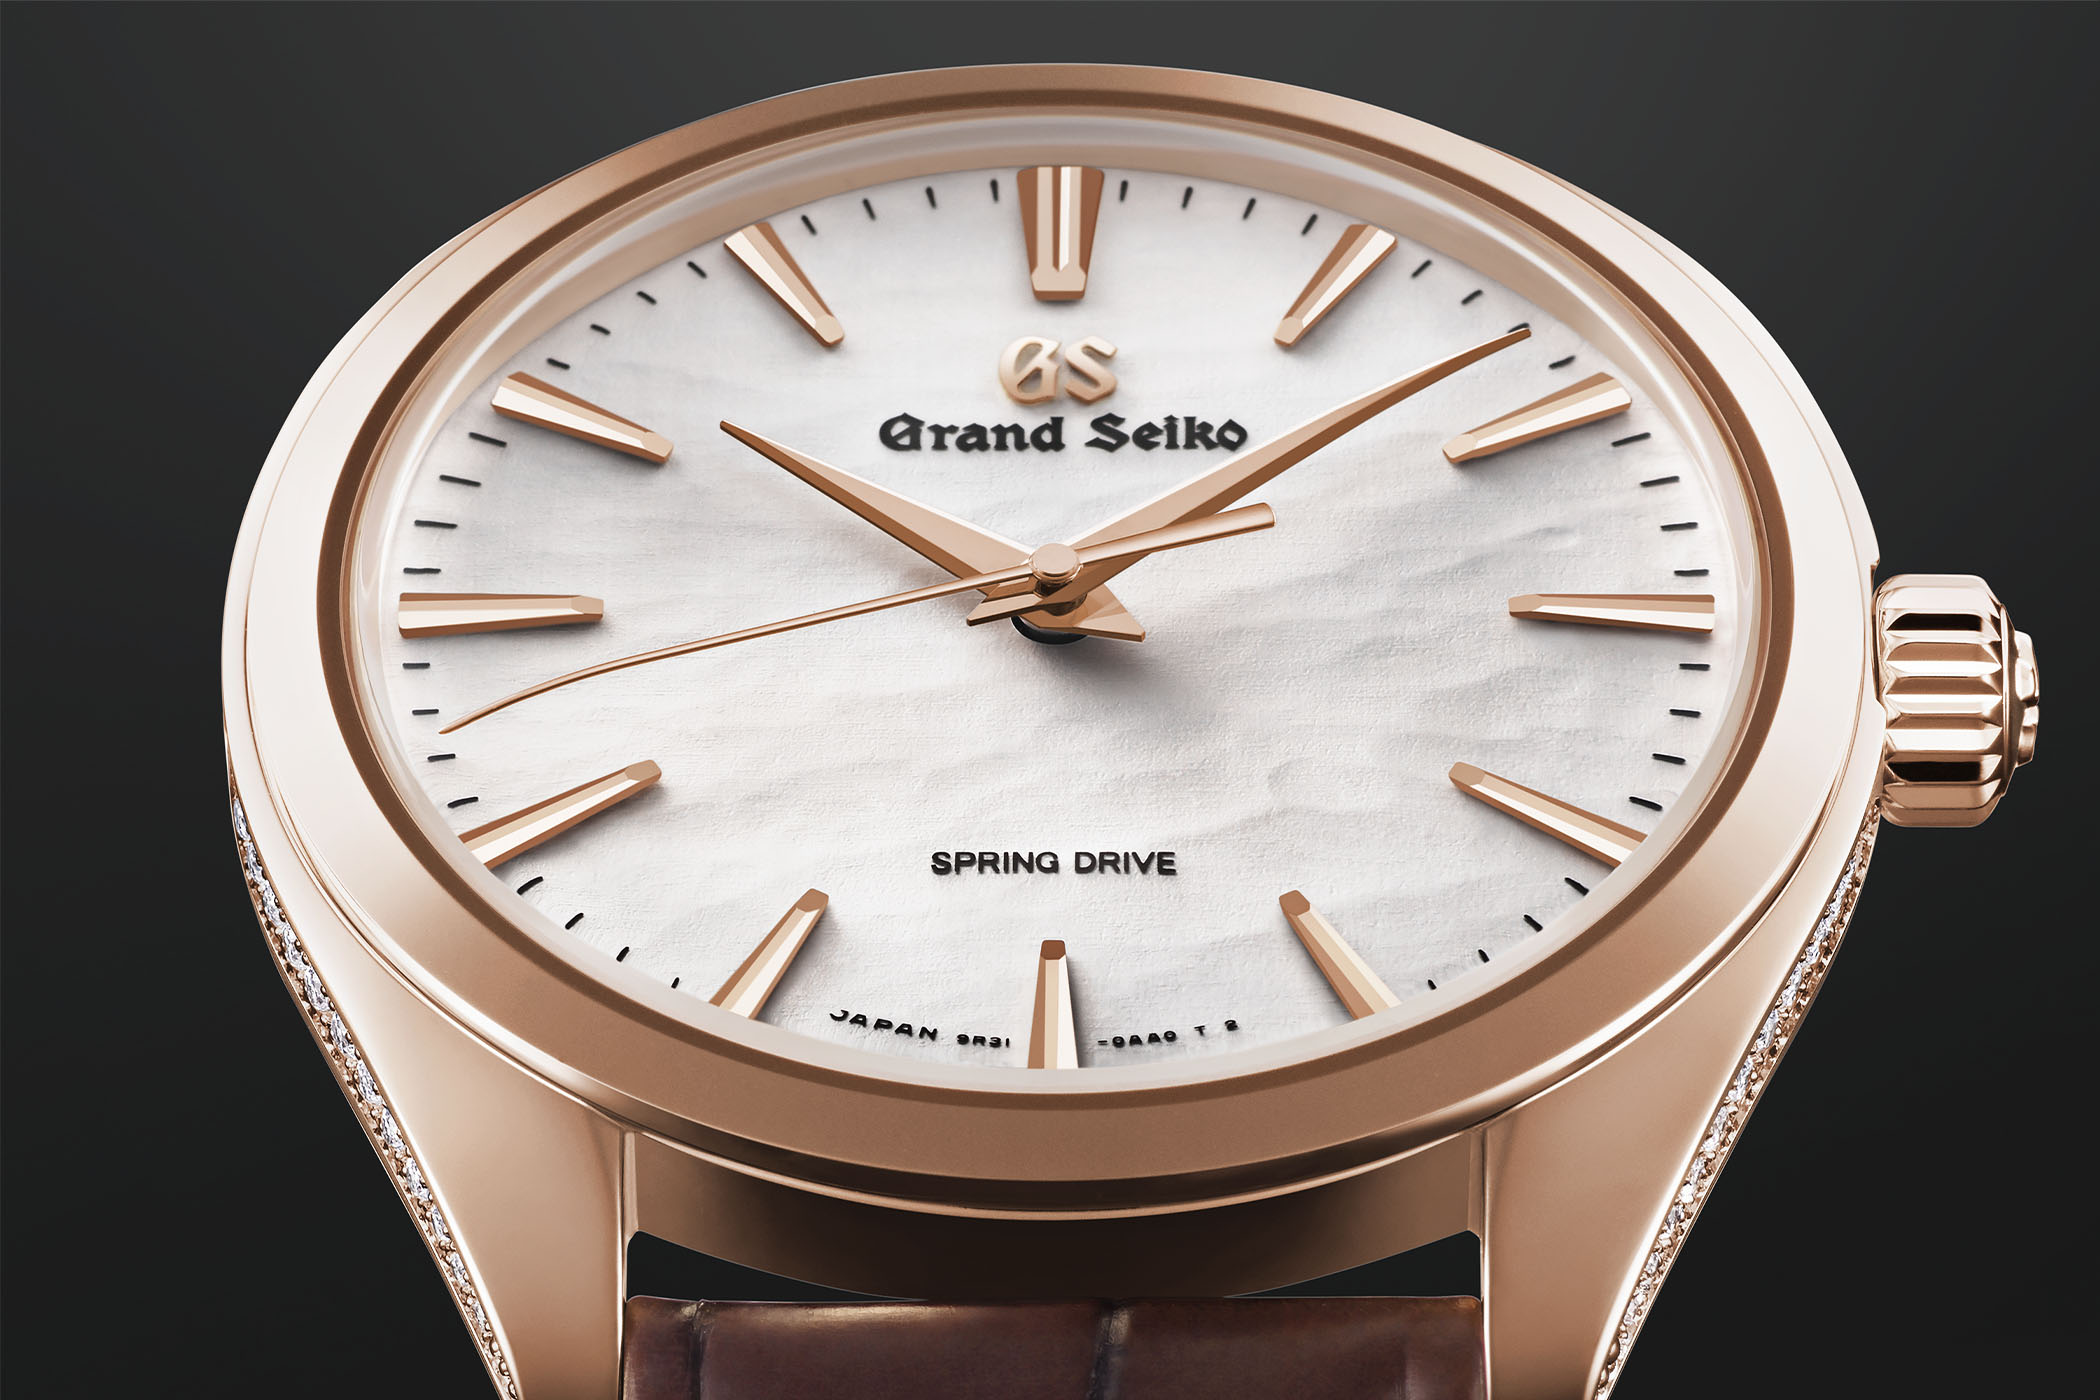 Introducing The Grand Seiko Elegance Collection Spring Drive SBGY008 Watch